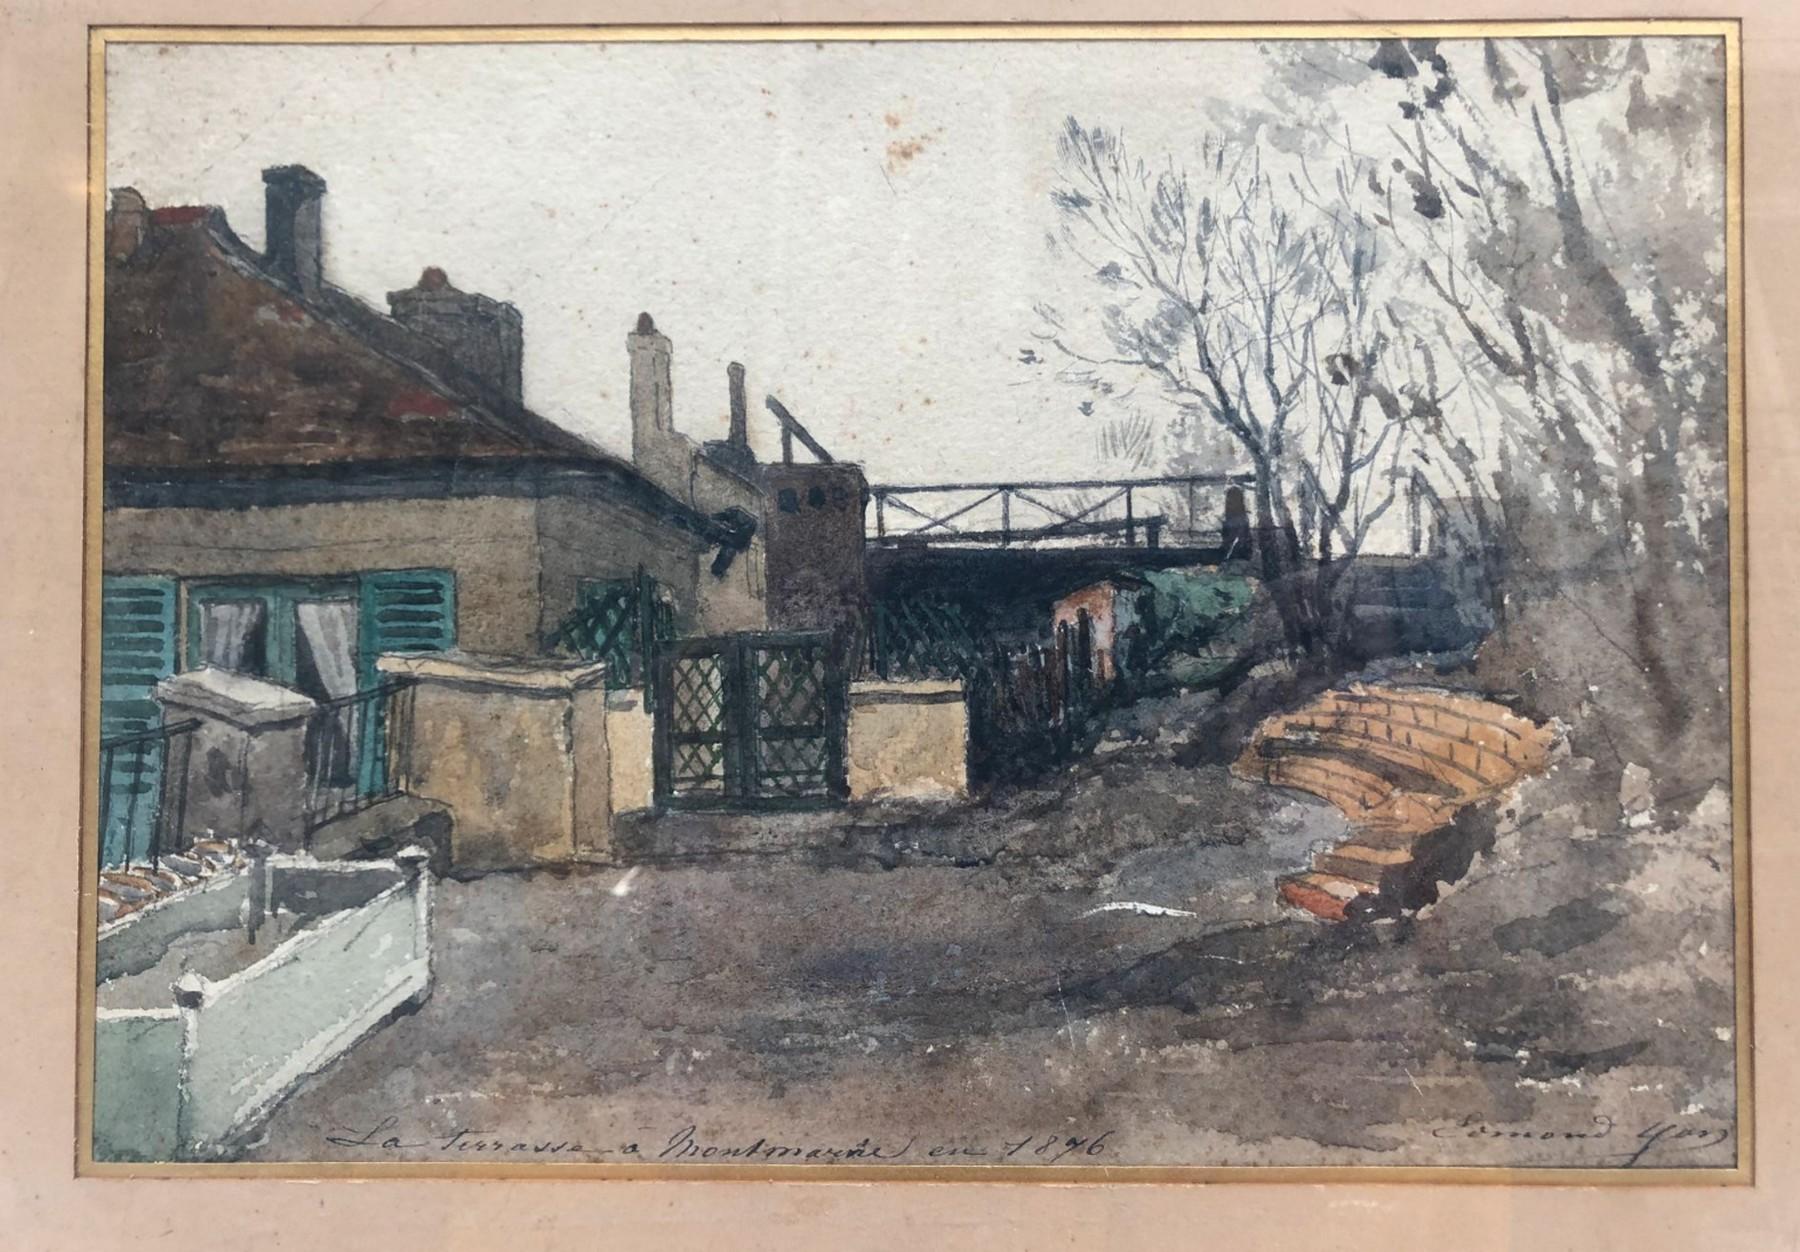 Edmond Yon (1836 - 1897) 
La terrasse à Montmartre, 1876, (The terrace in Montmartre)
Titled and dated on the lower middle,  signed on the lower right
watercolor on paper
18.5 x 26.5 cm
In quite good condition : foxings inthe upper part, a scratch